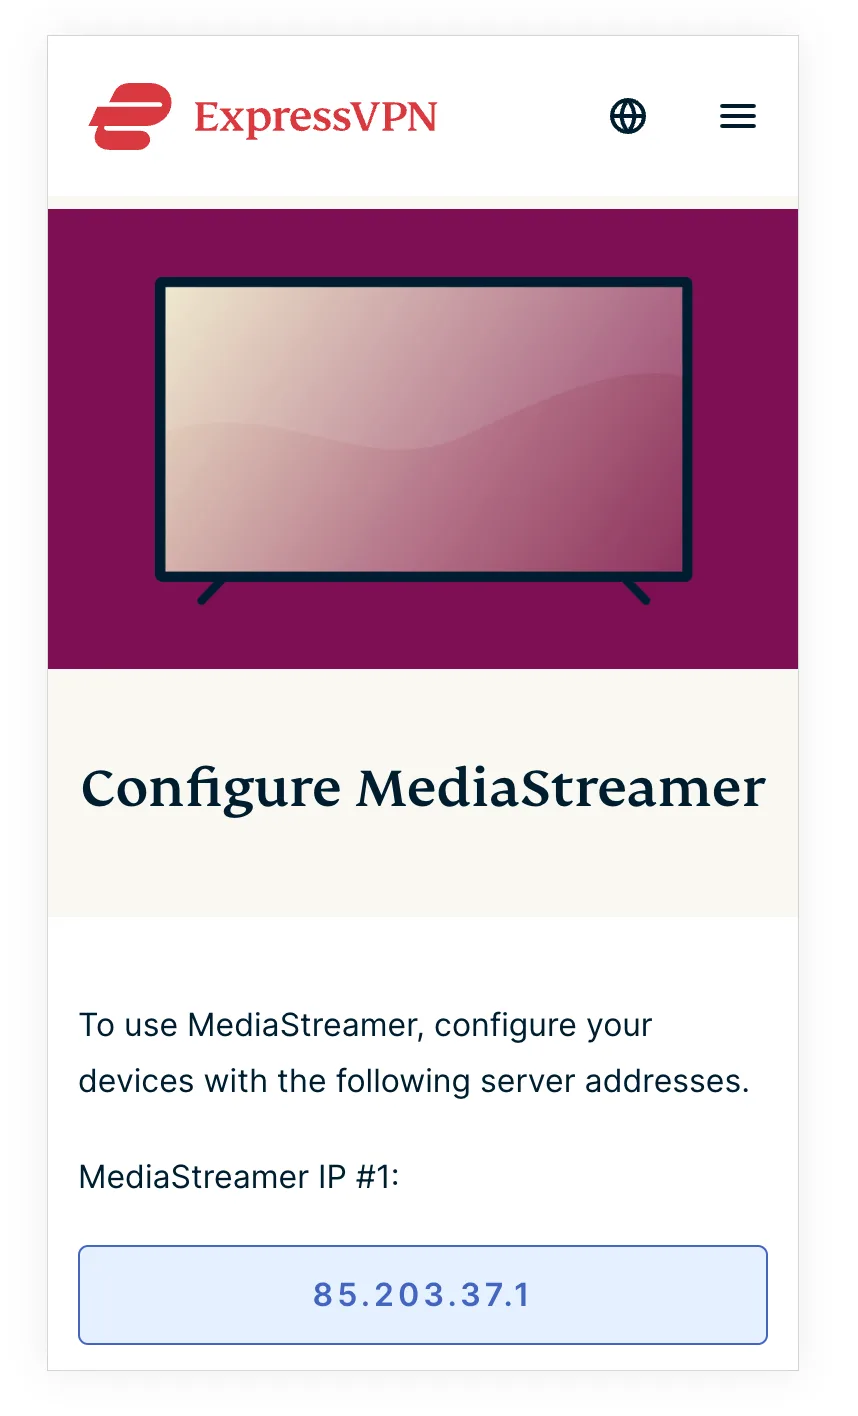 The image is of a configuration page from ExpressVPN, for MediaStreamer. It instructs users to configure their devices with the provided server address. The MediaStreamer IP address given is 85.203.37.1.